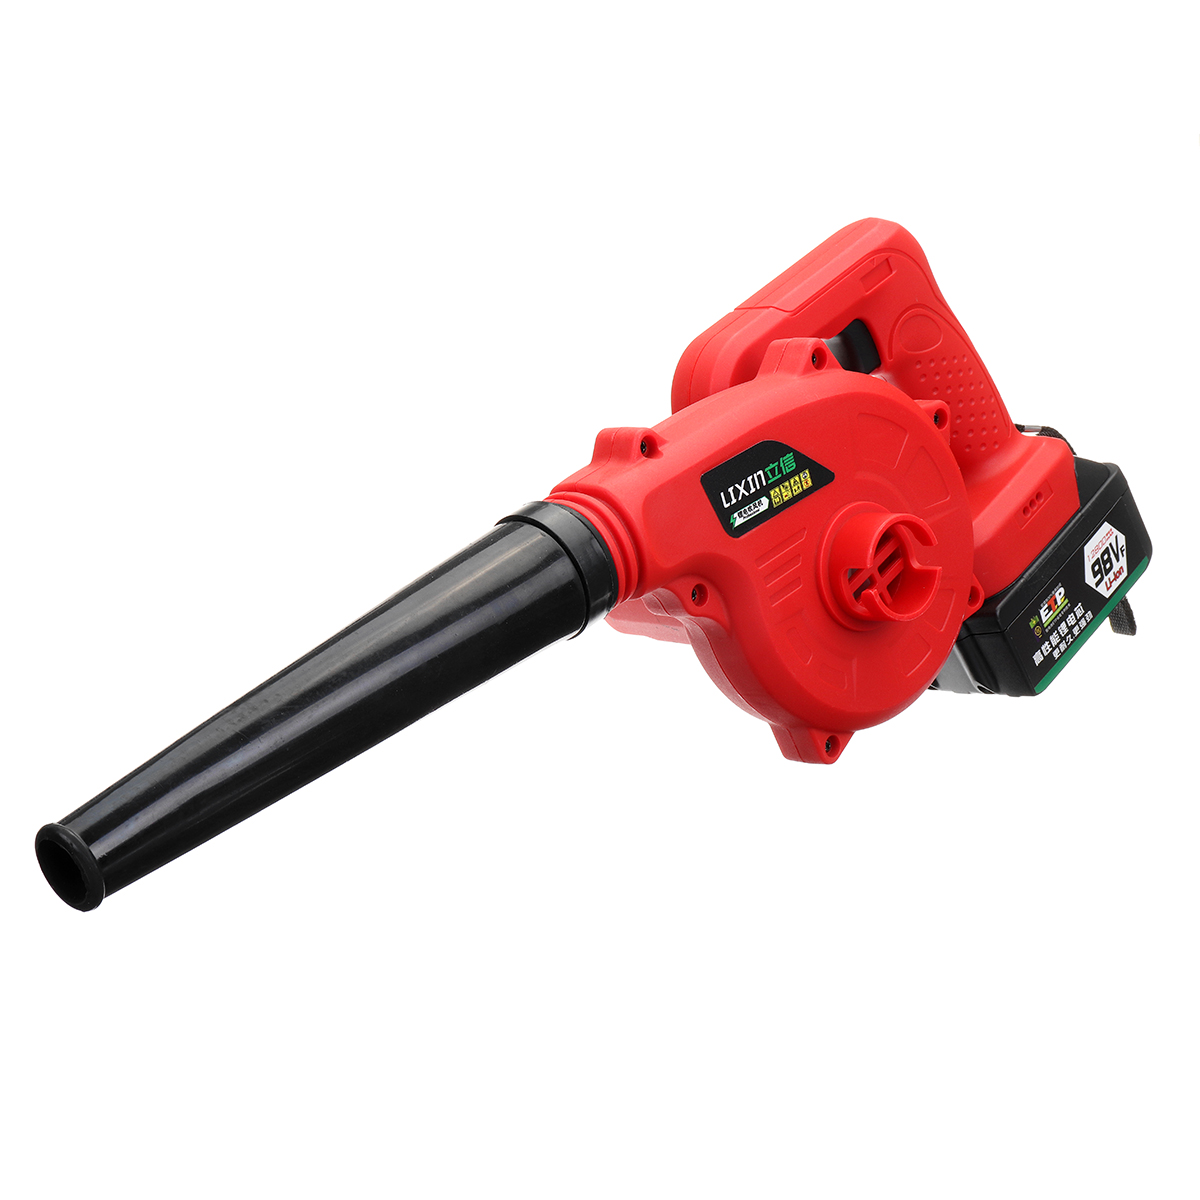 Check out this Multifunctional Air Blower! Head over to our webiste for more information and to get yours delivered directly to you.

bestpowertoolkit.com/product/220v-1…

 #leafblower #tools #toolshop #toolset #toolsforlife #powertools #powertoolsrule